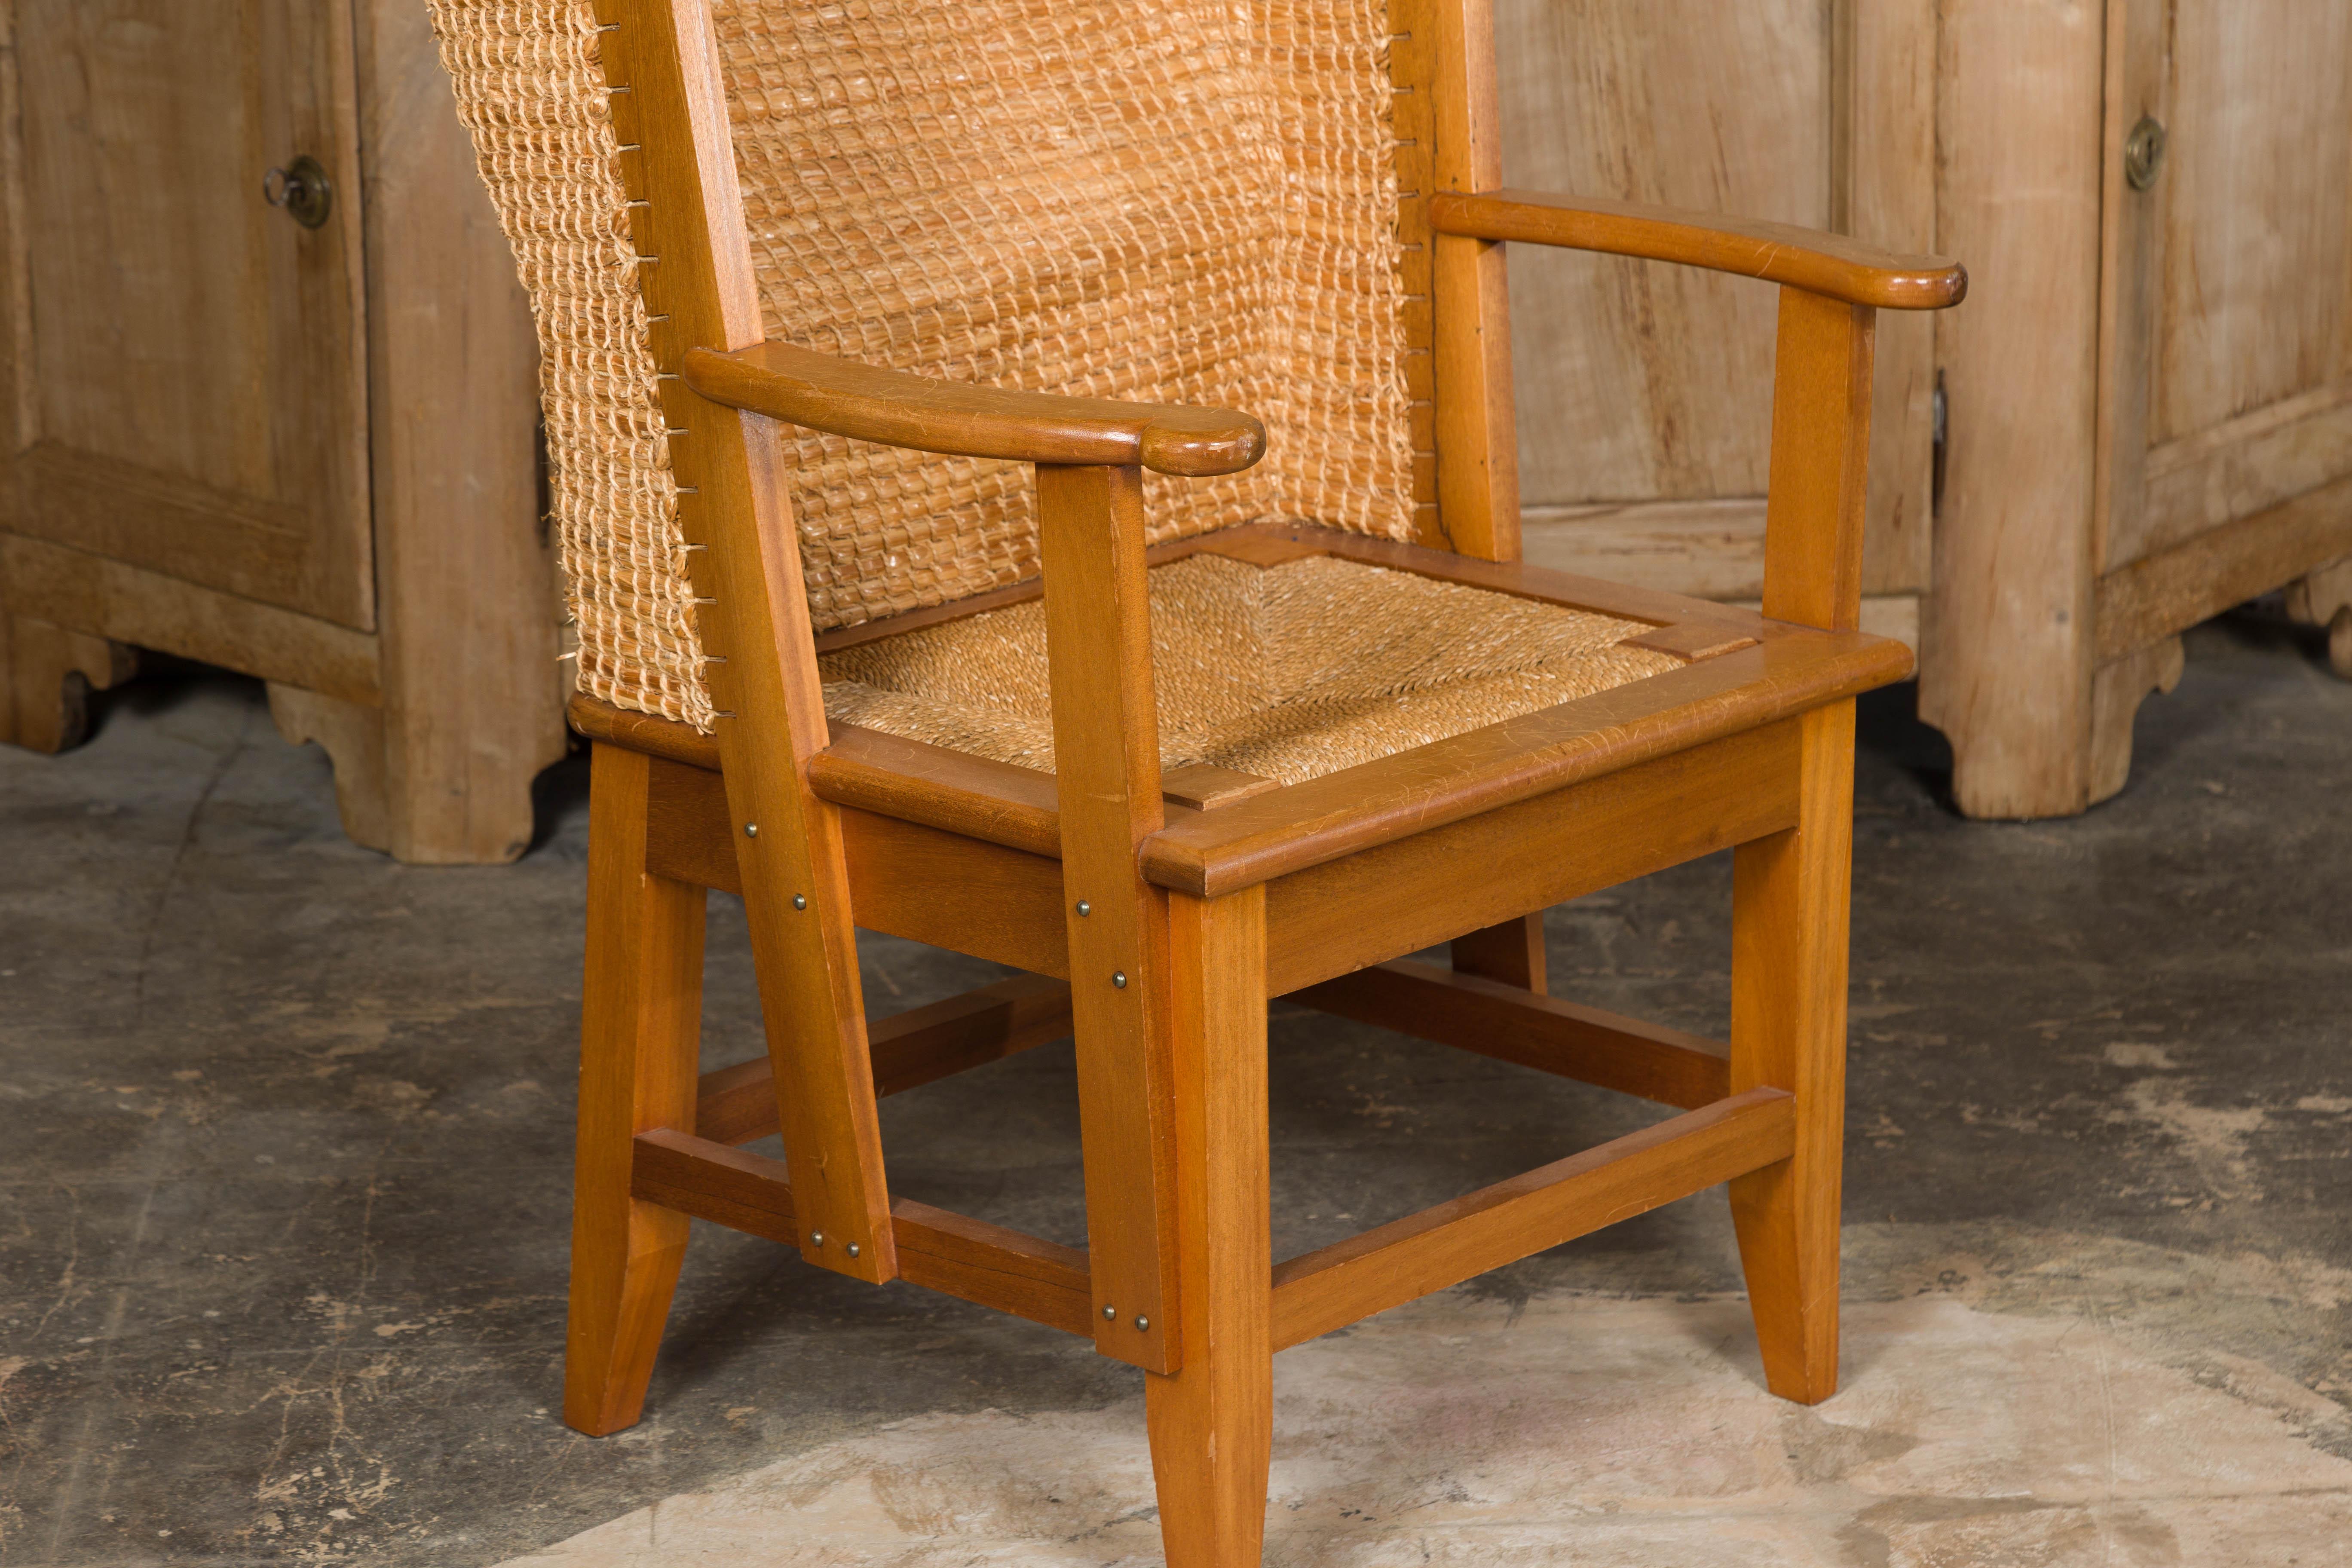 Orkney Island Midcentury Scottish Canopy Chair with Hand Woven Straw Back For Sale 4